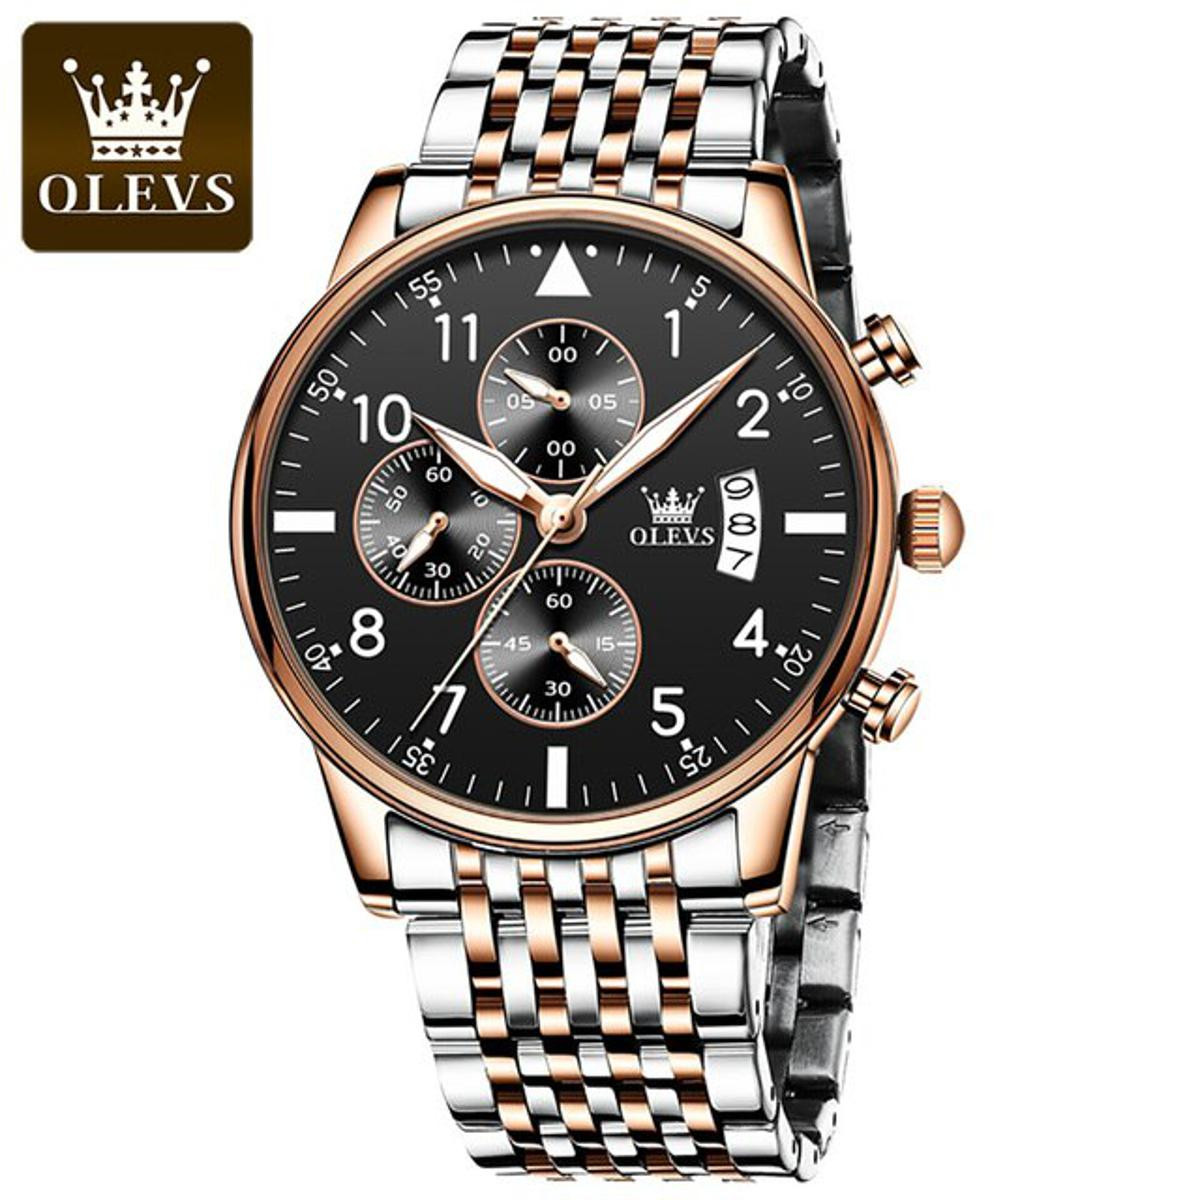 OLEVS 2869 Quartz Waterproof Chronograph Stainless Steel Watch For Man's- Black Dial